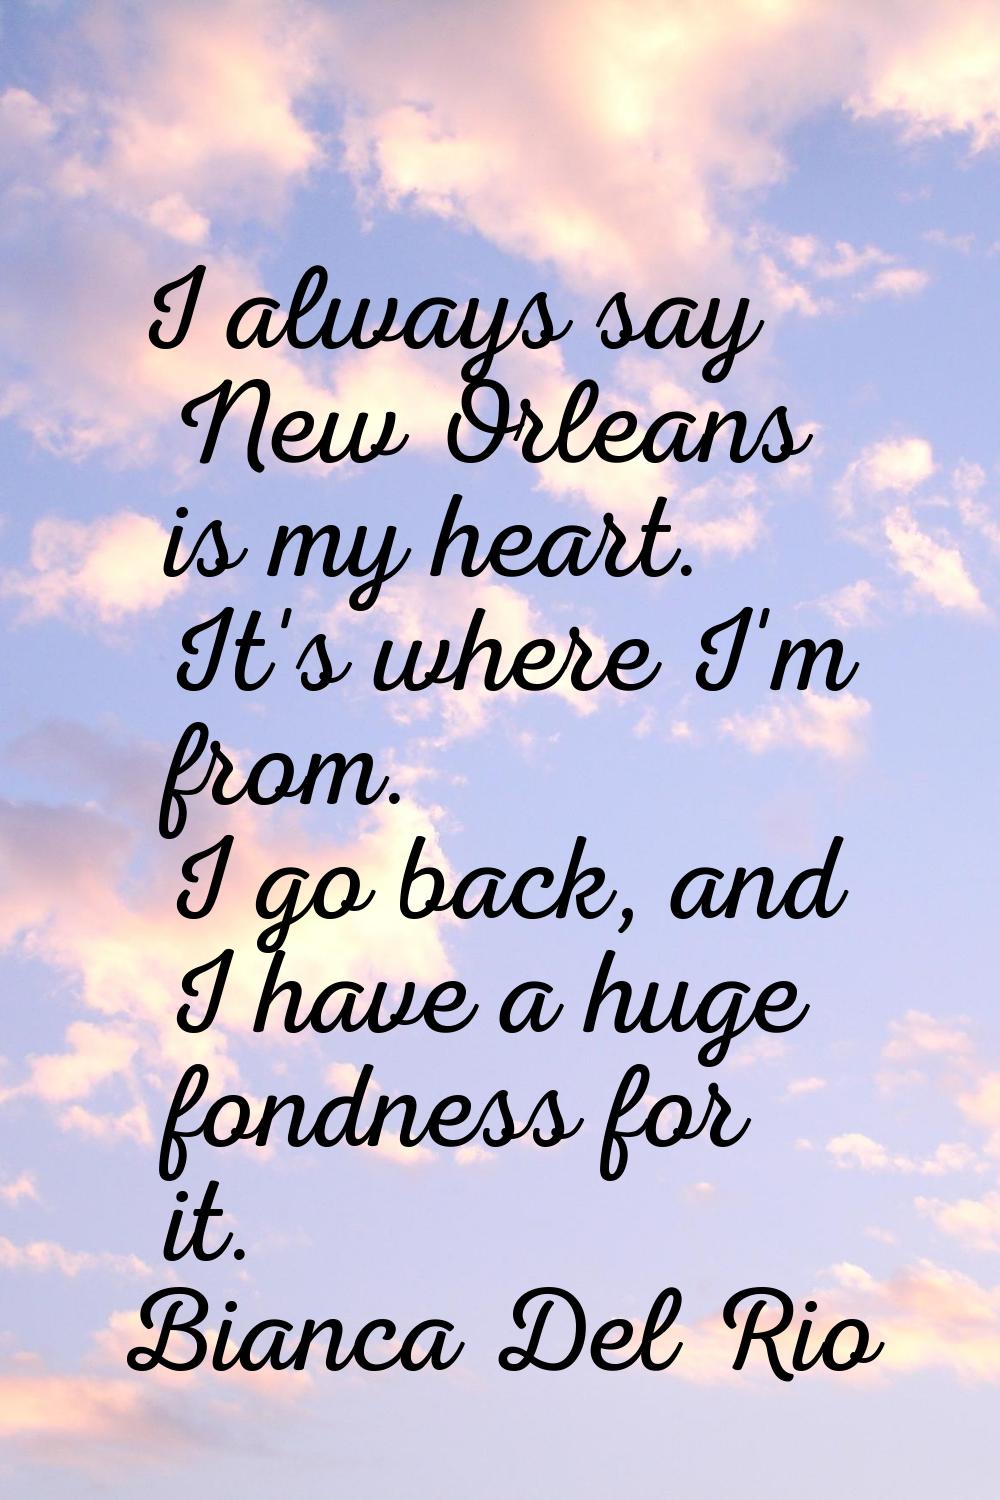 I always say New Orleans is my heart. It's where I'm from. I go back, and I have a huge fondness fo